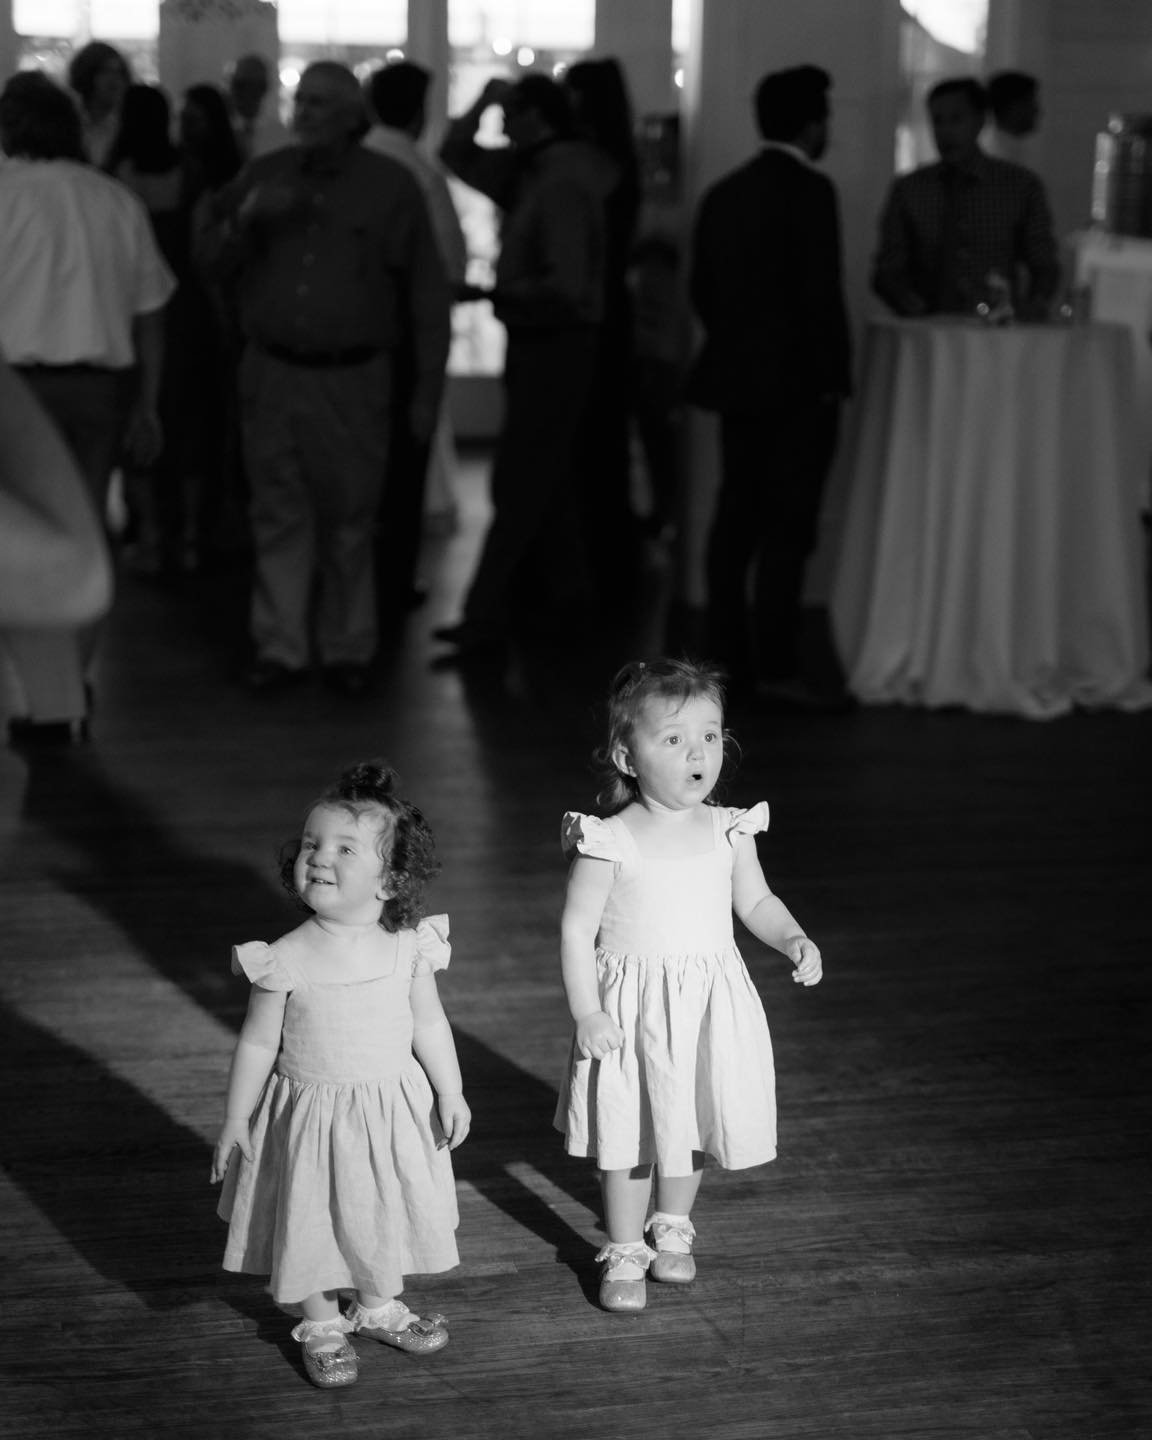 These little girls were shook for the DJ lights. 🚥
.
.
.
.
.
.
.
.
.
#filmweddingphotographer #filmweddingphotography #austinfilmphotographer #austinweddingplanner #austinengagementphotos #texasweddingphotographer #austinweddingphotographer #austinw